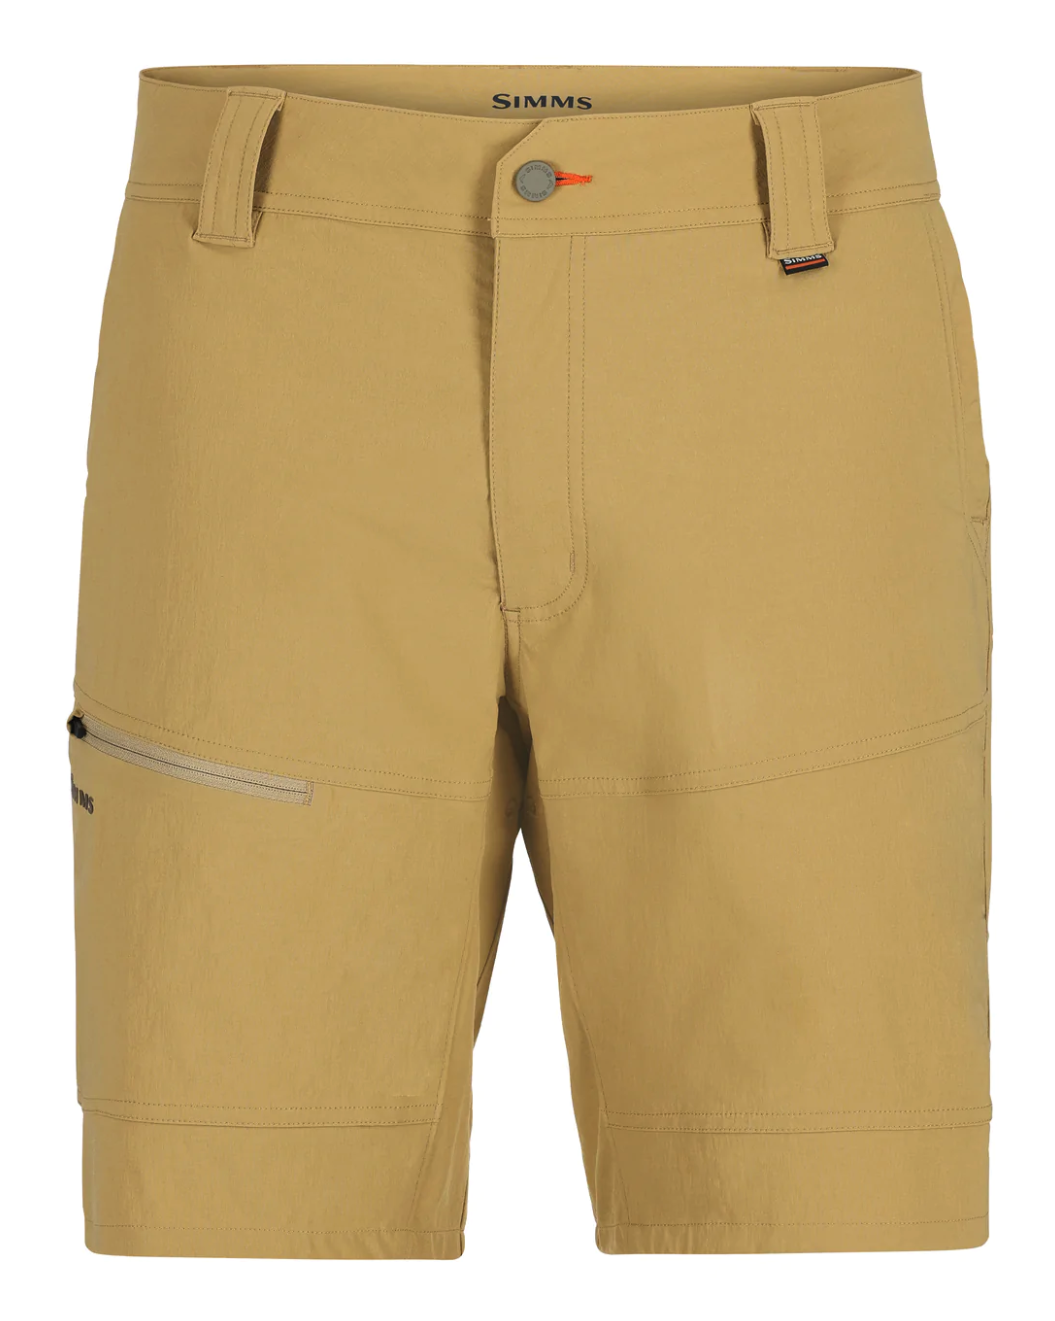 Simms Guide Shorts Camel